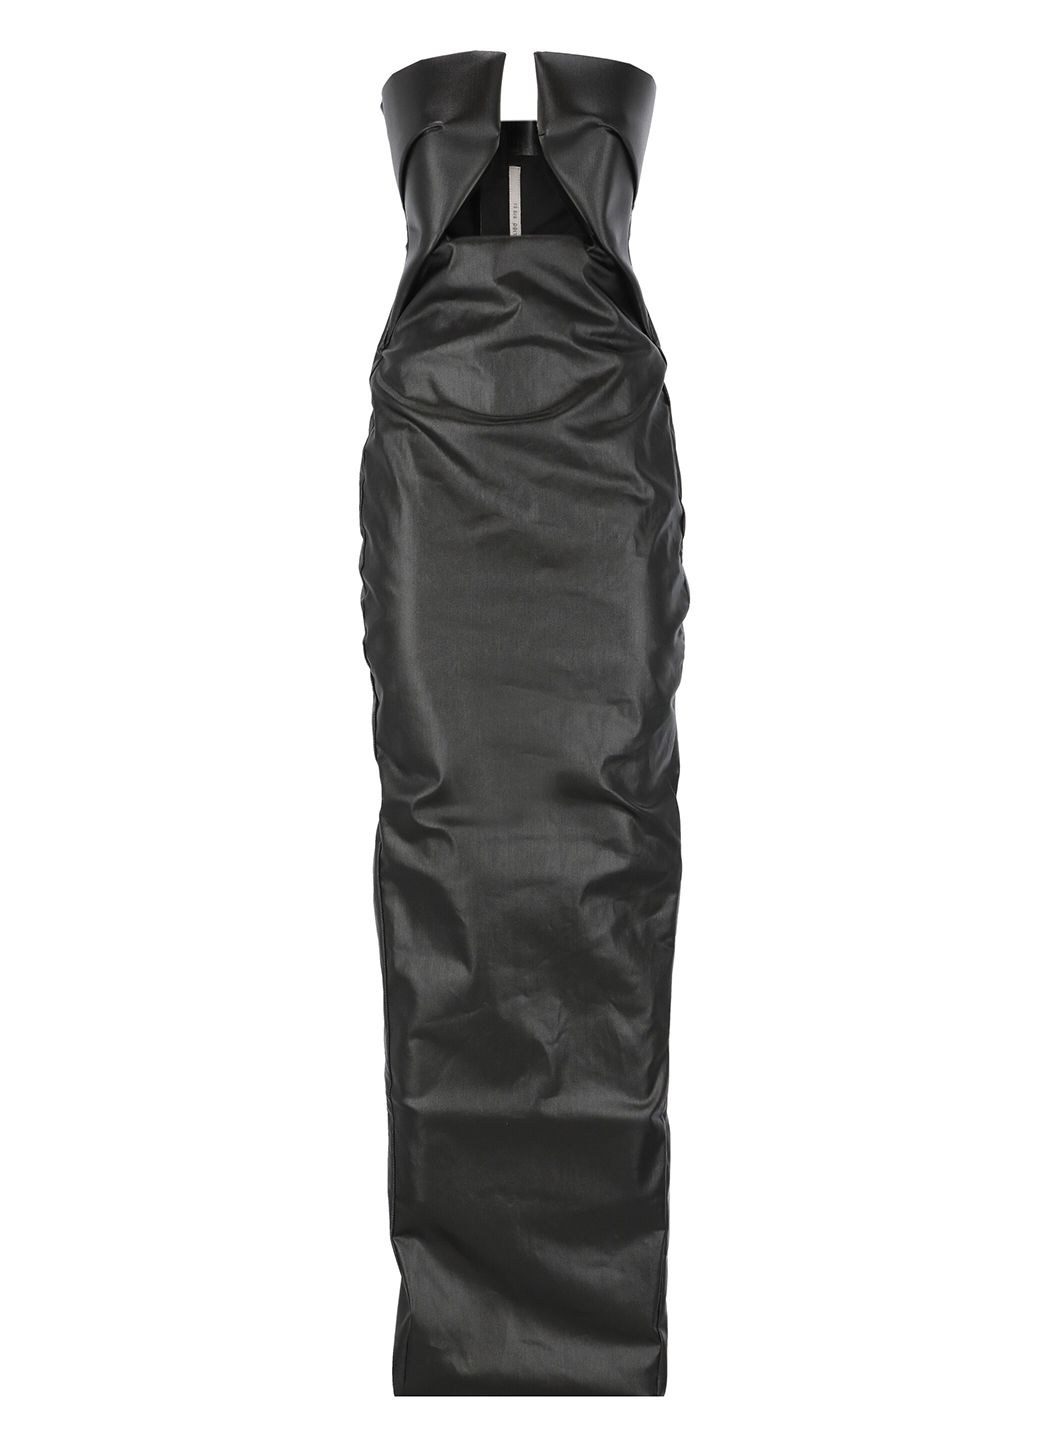 Prong Gown dress